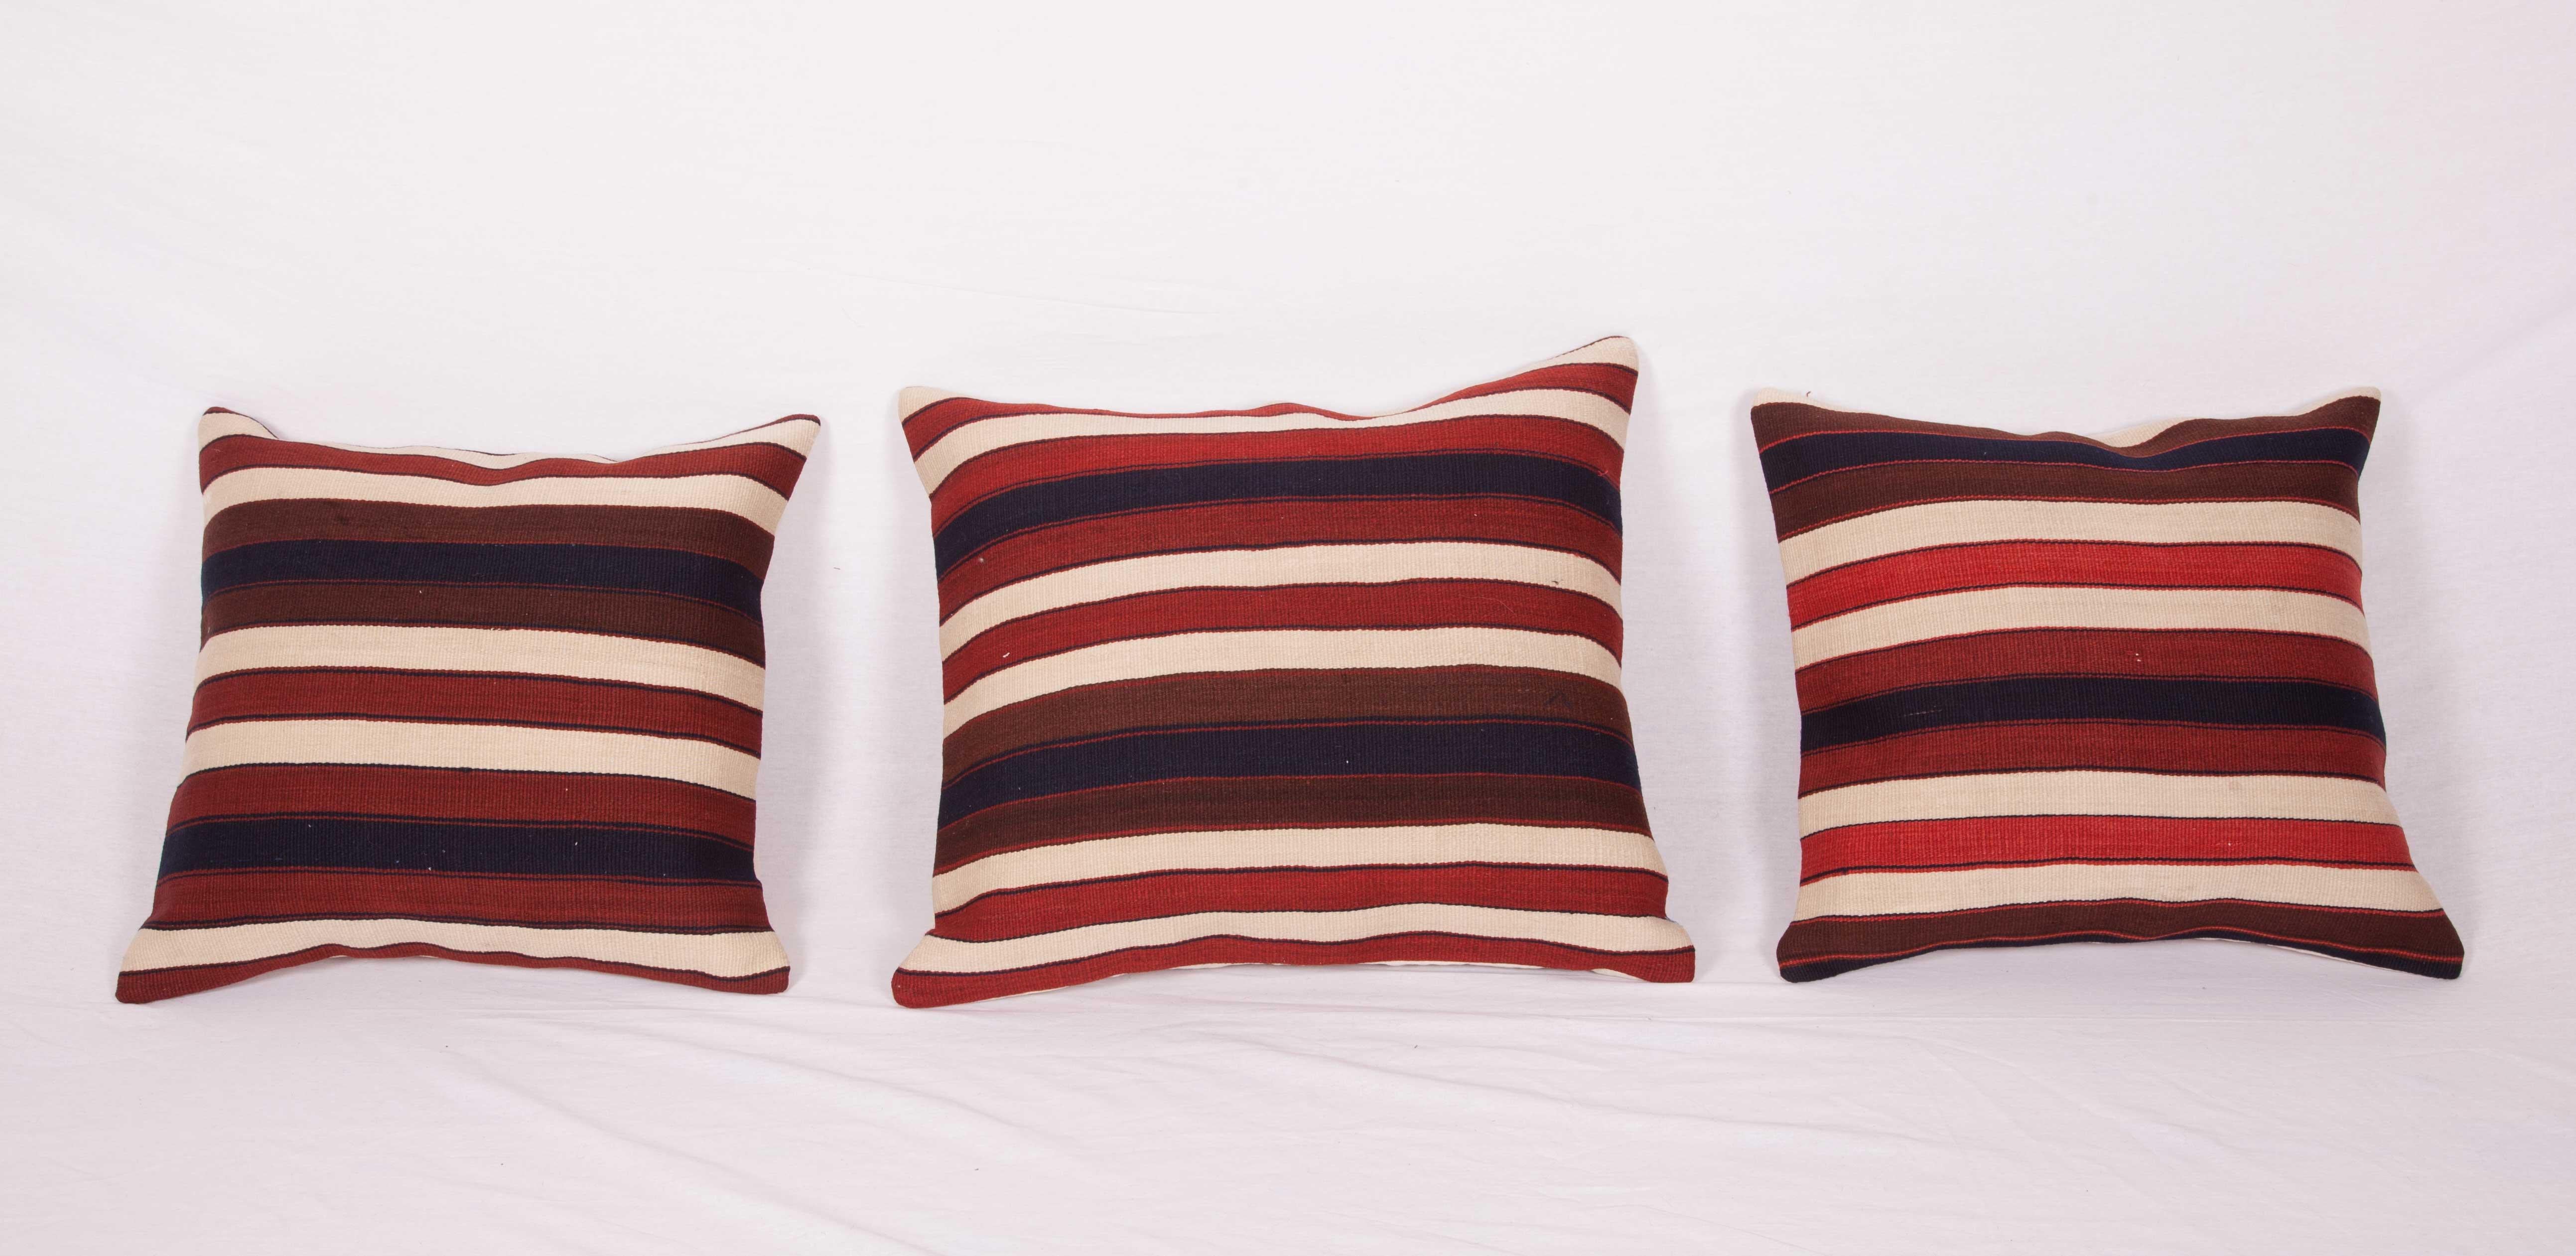 The pillow cases are made from an antique Anatolian Kilim. They do not come with inserts but come with bags made to the size and out of cotton to accommodate the filling. The backing is made of linen. Please note filling is not provided. Since the